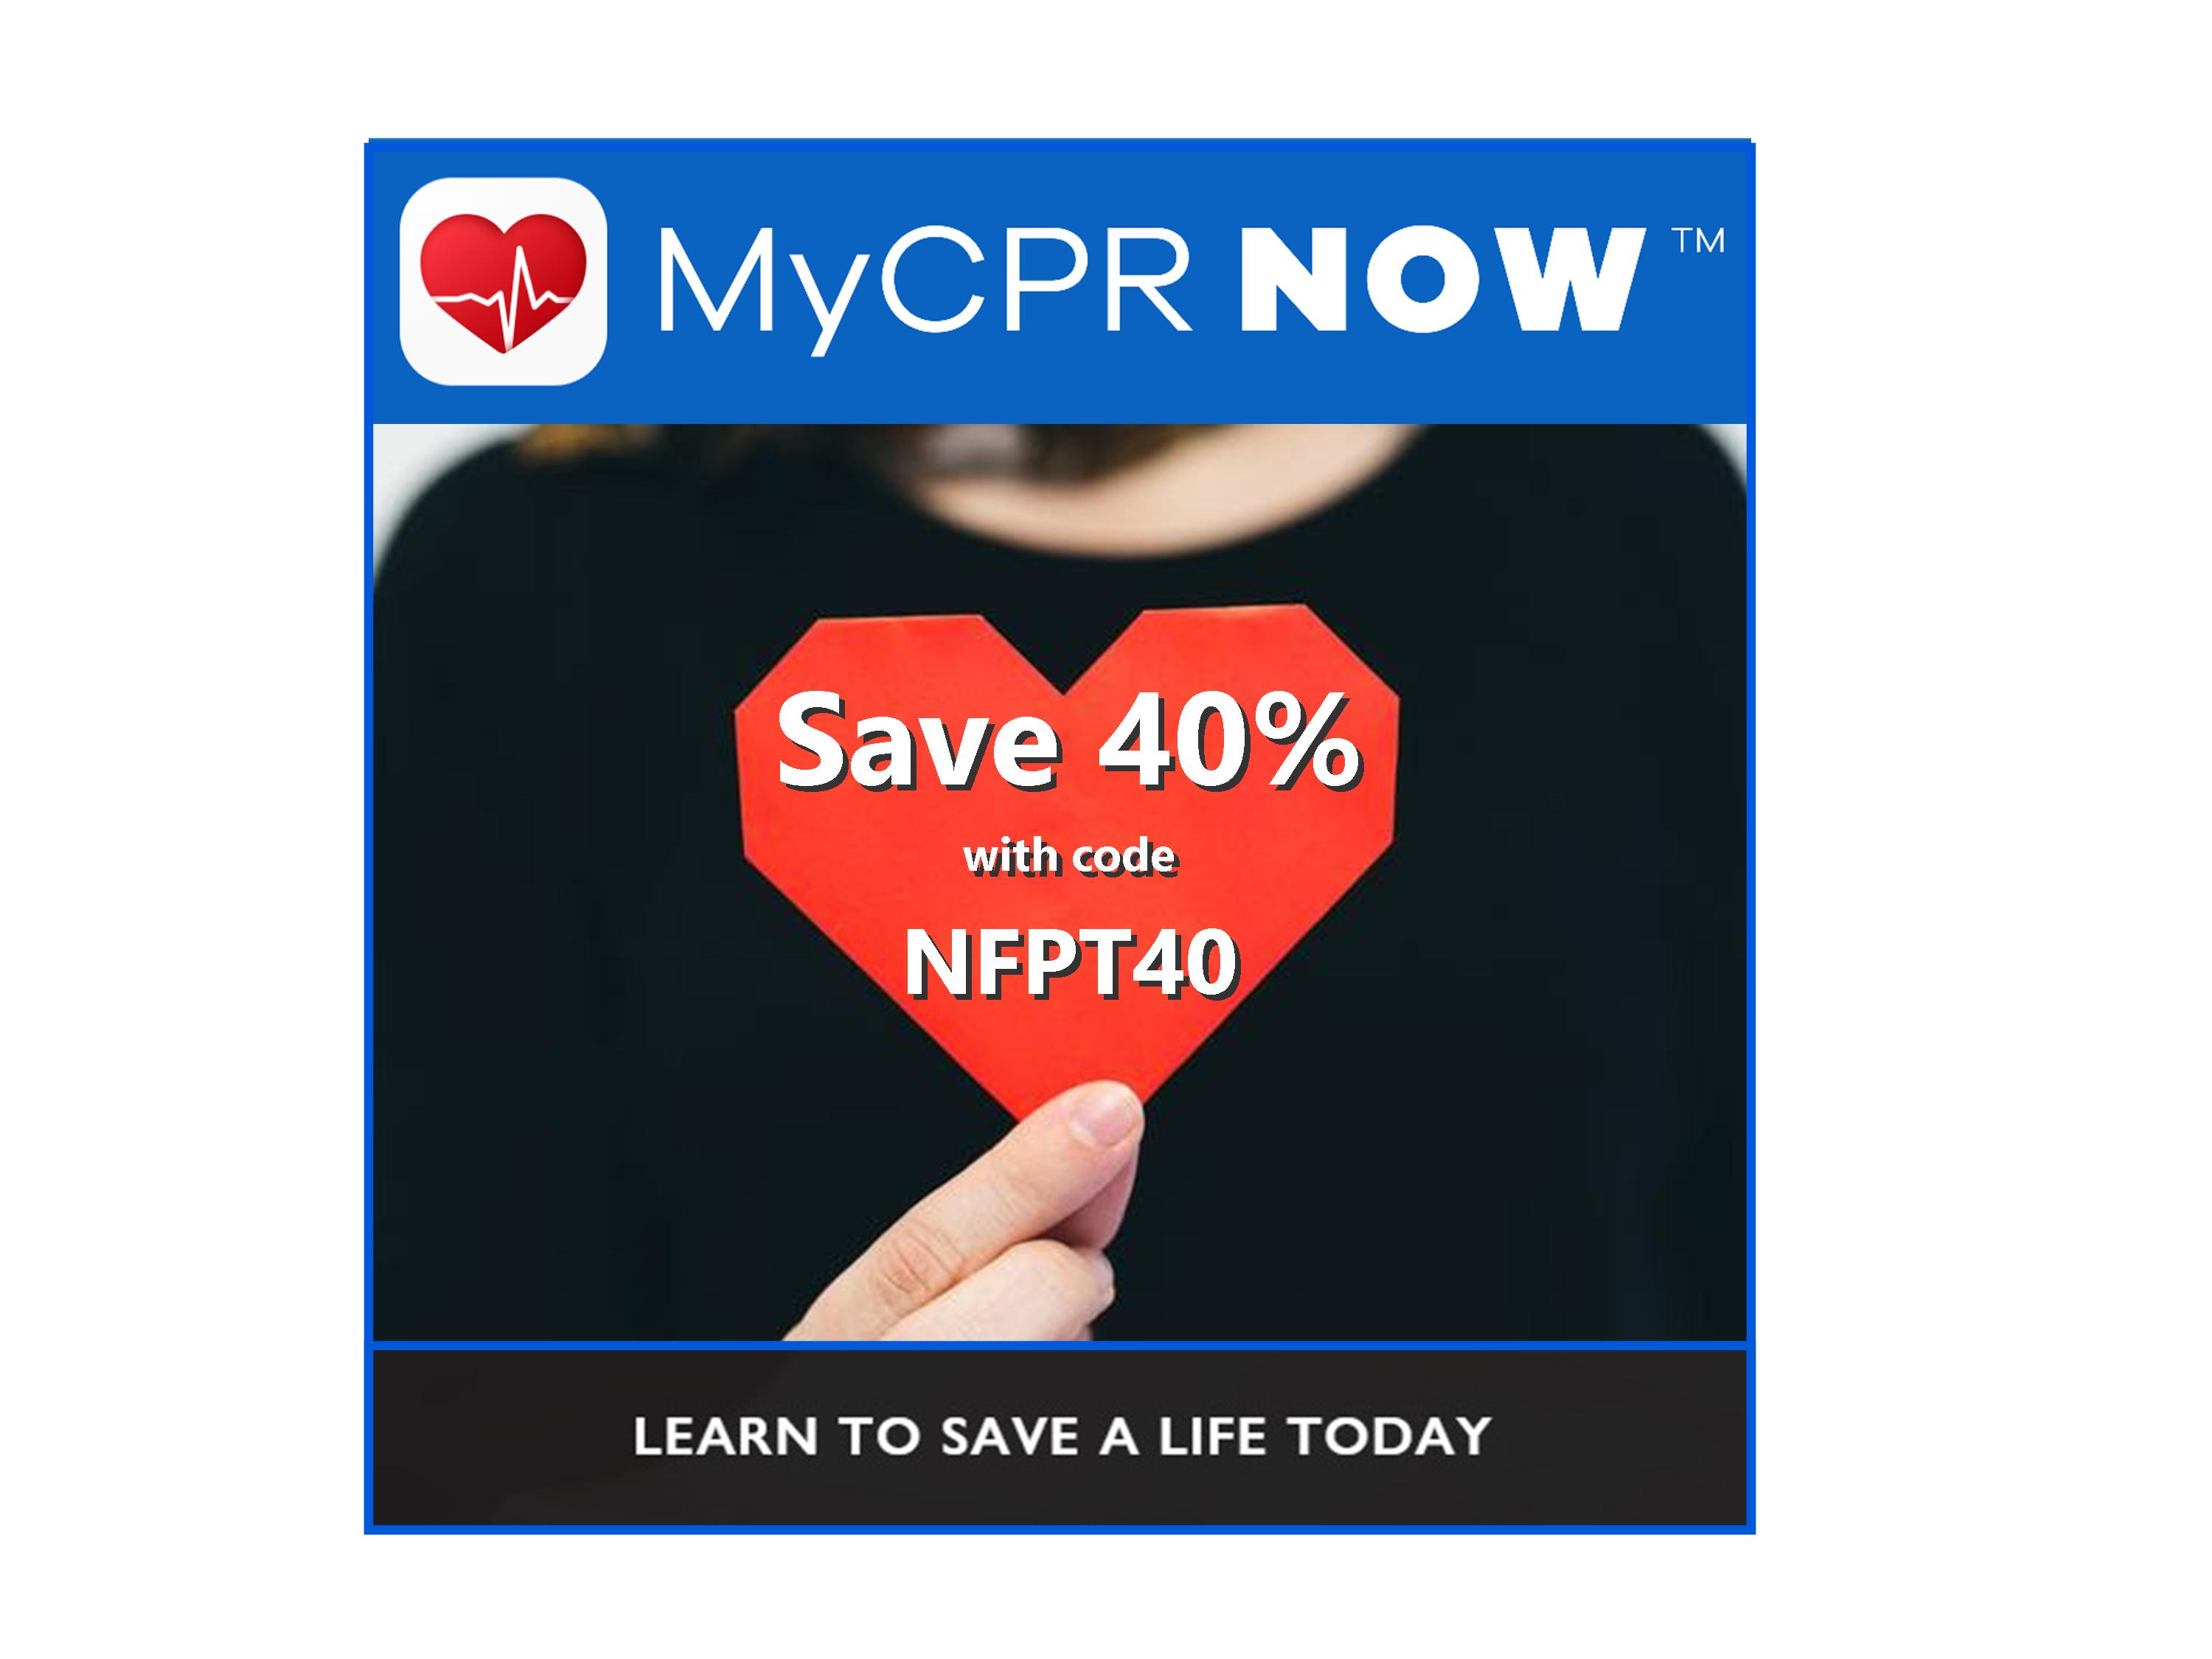 MyCPR NOW Email Promotion NFPT